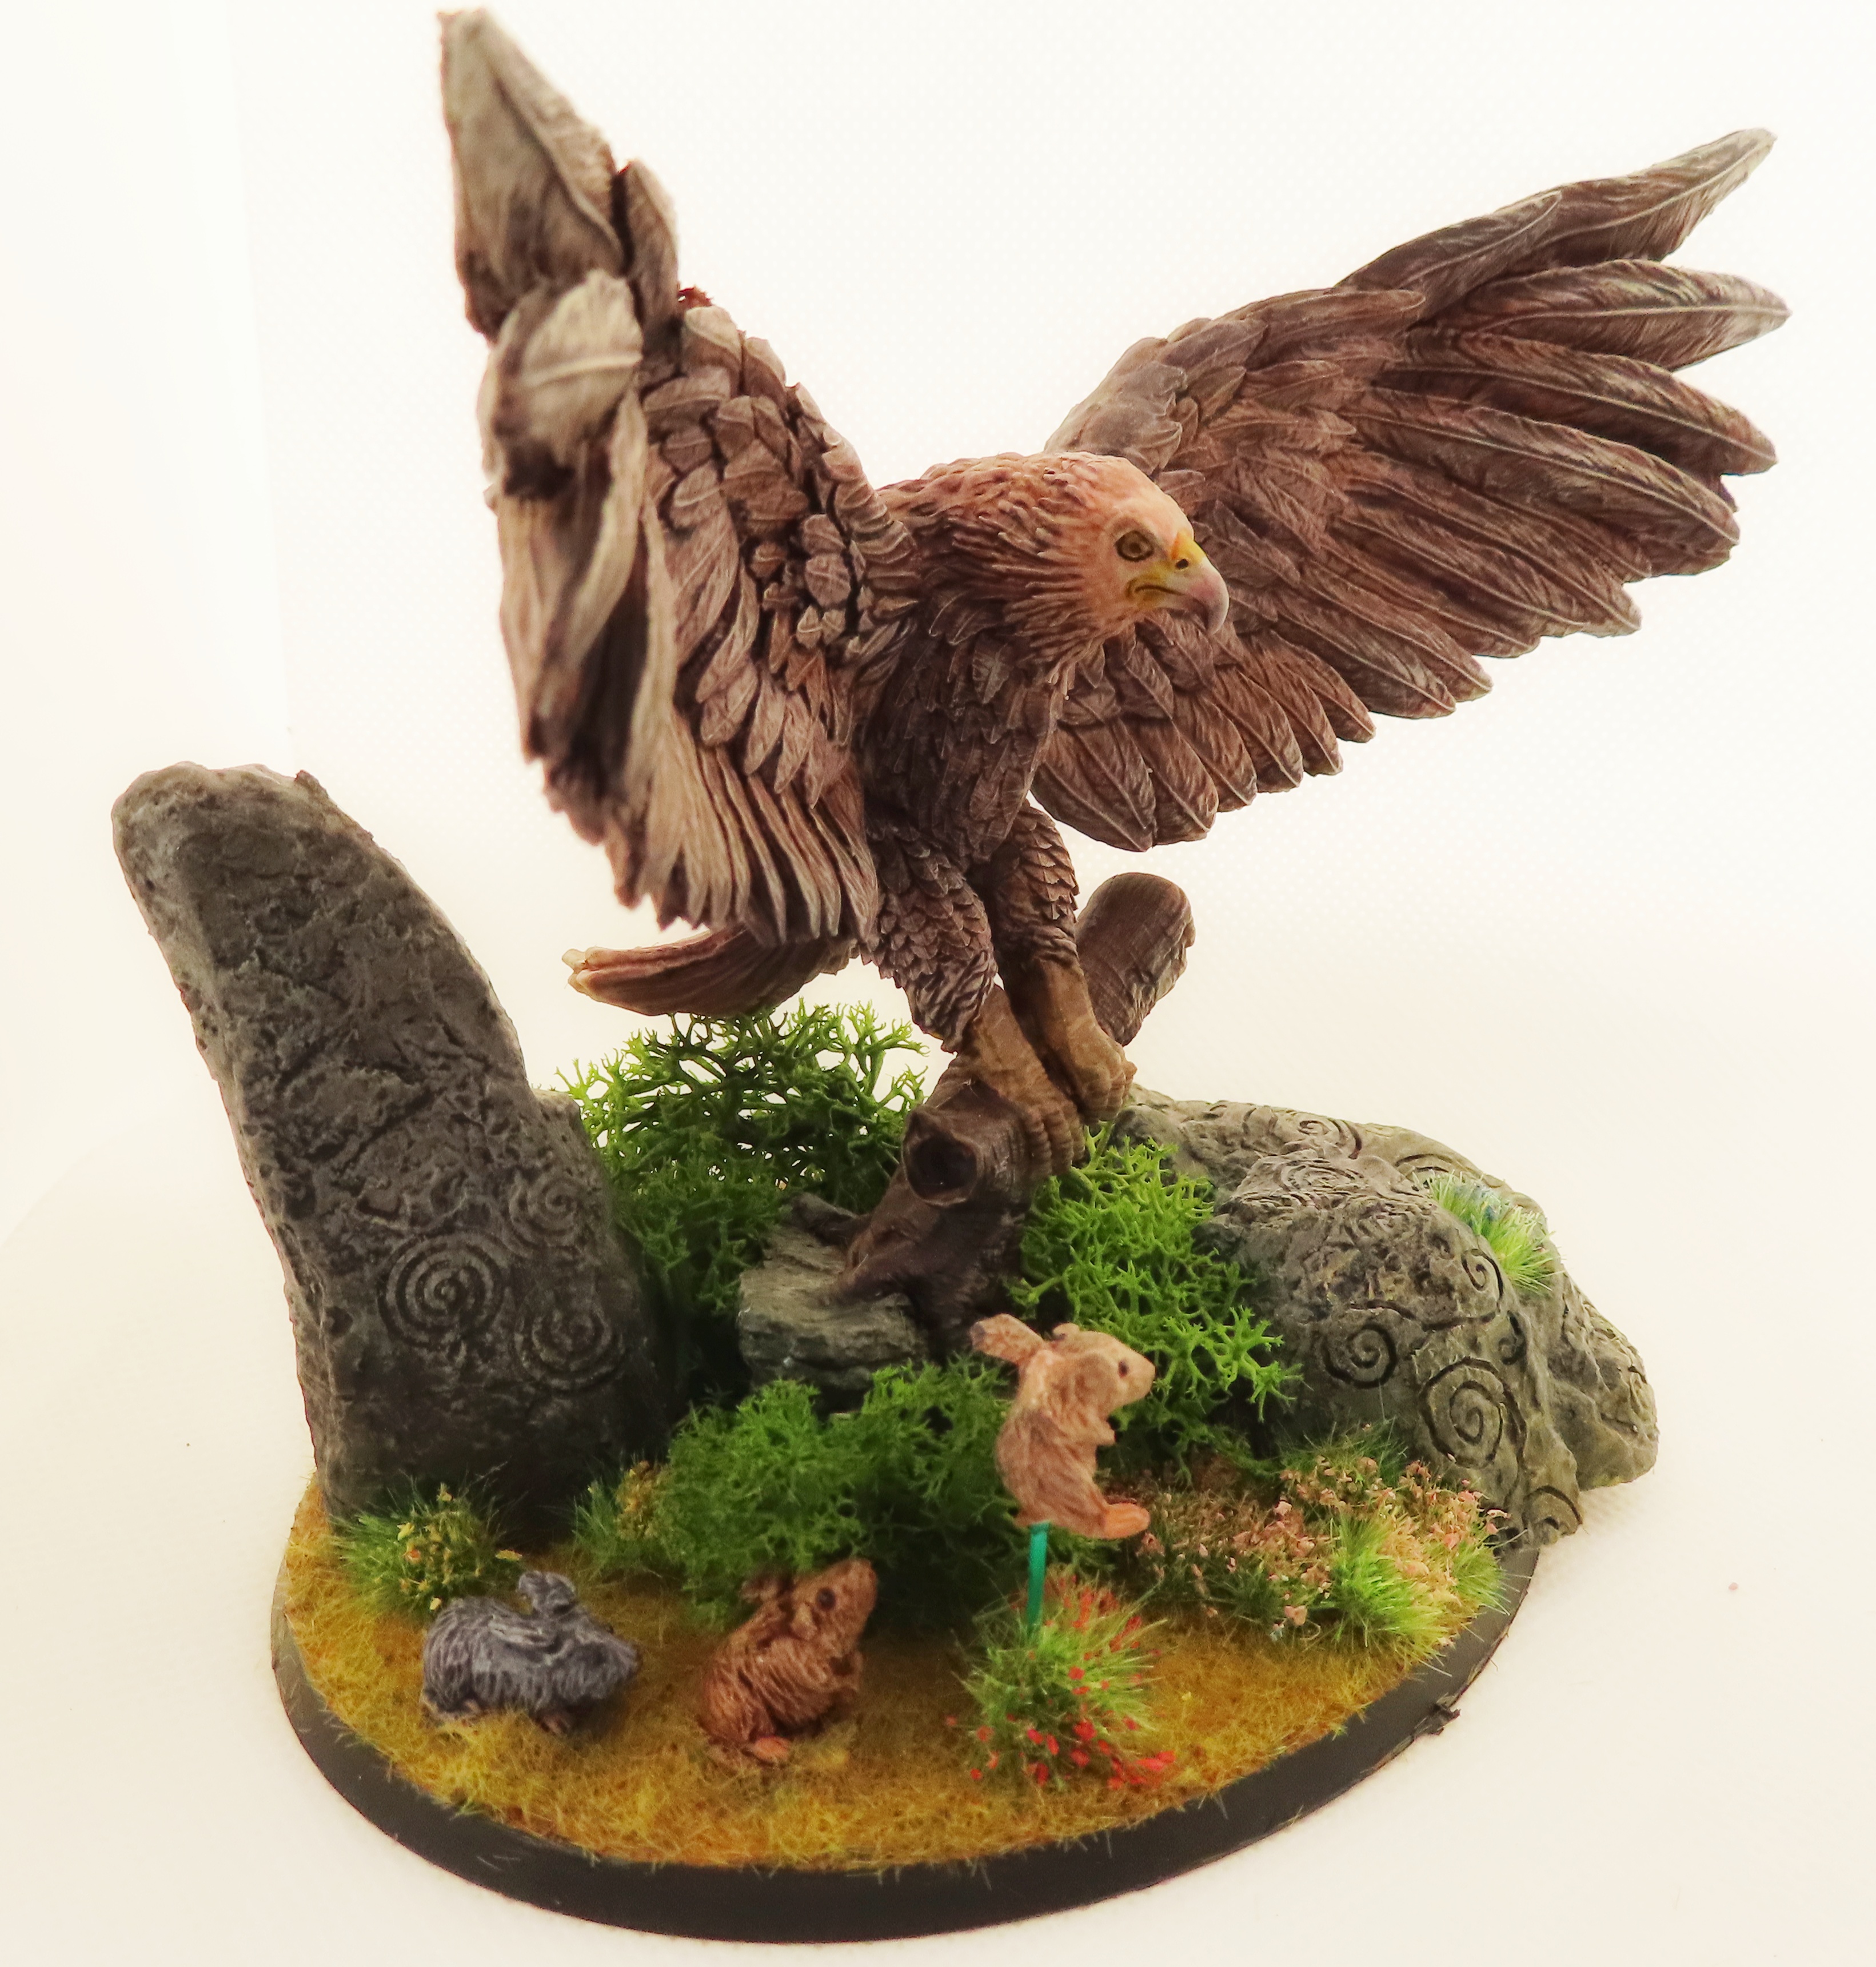 Eagle Diorama #2 by thedace